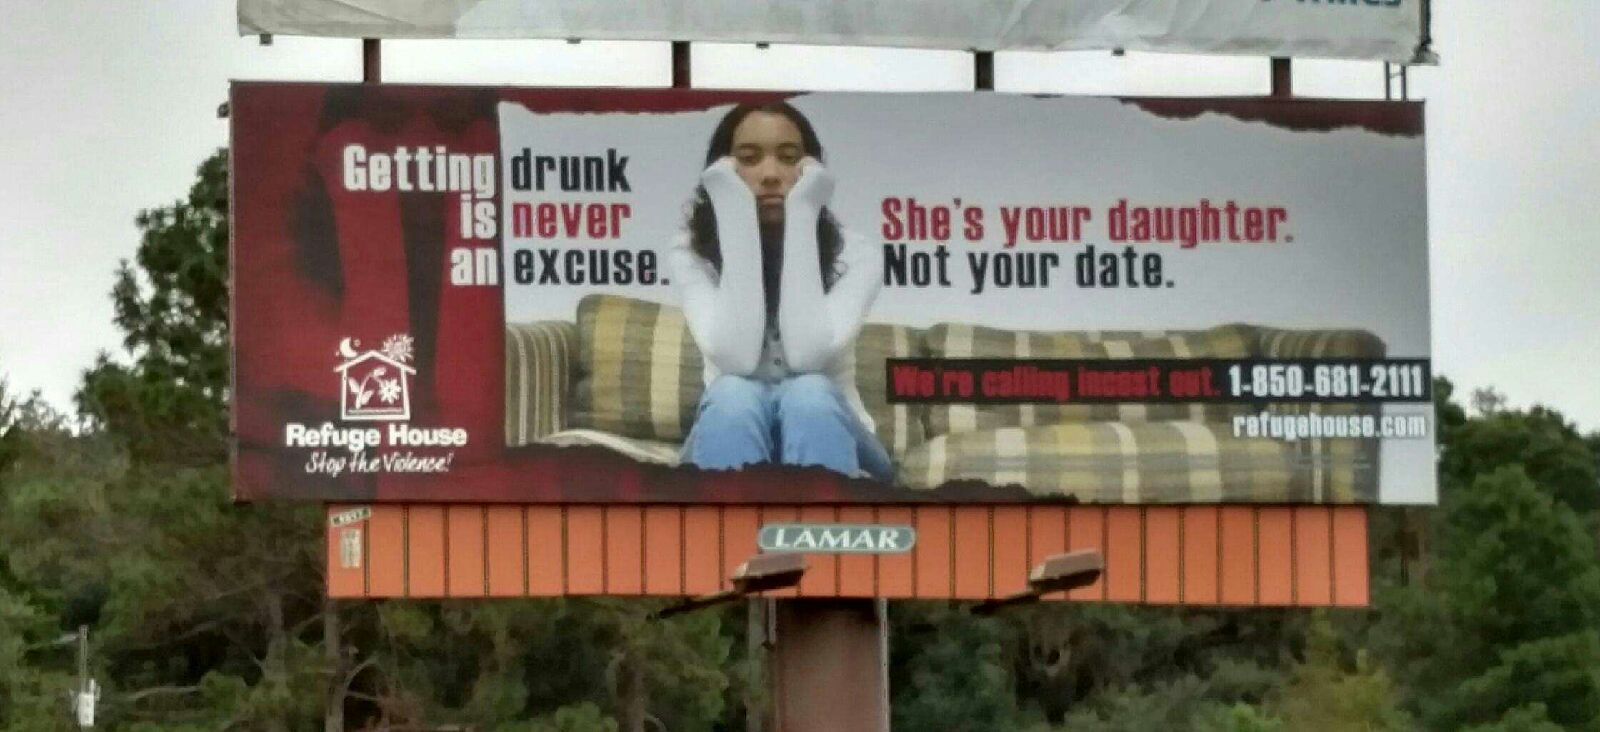 she's your daughter not your date - Getting drunk is never an excuse. She's your daughter. Not your date. wam ca un incent Out 18506812111 refugehouse.com Refuge House Stop The Violence! Lamar